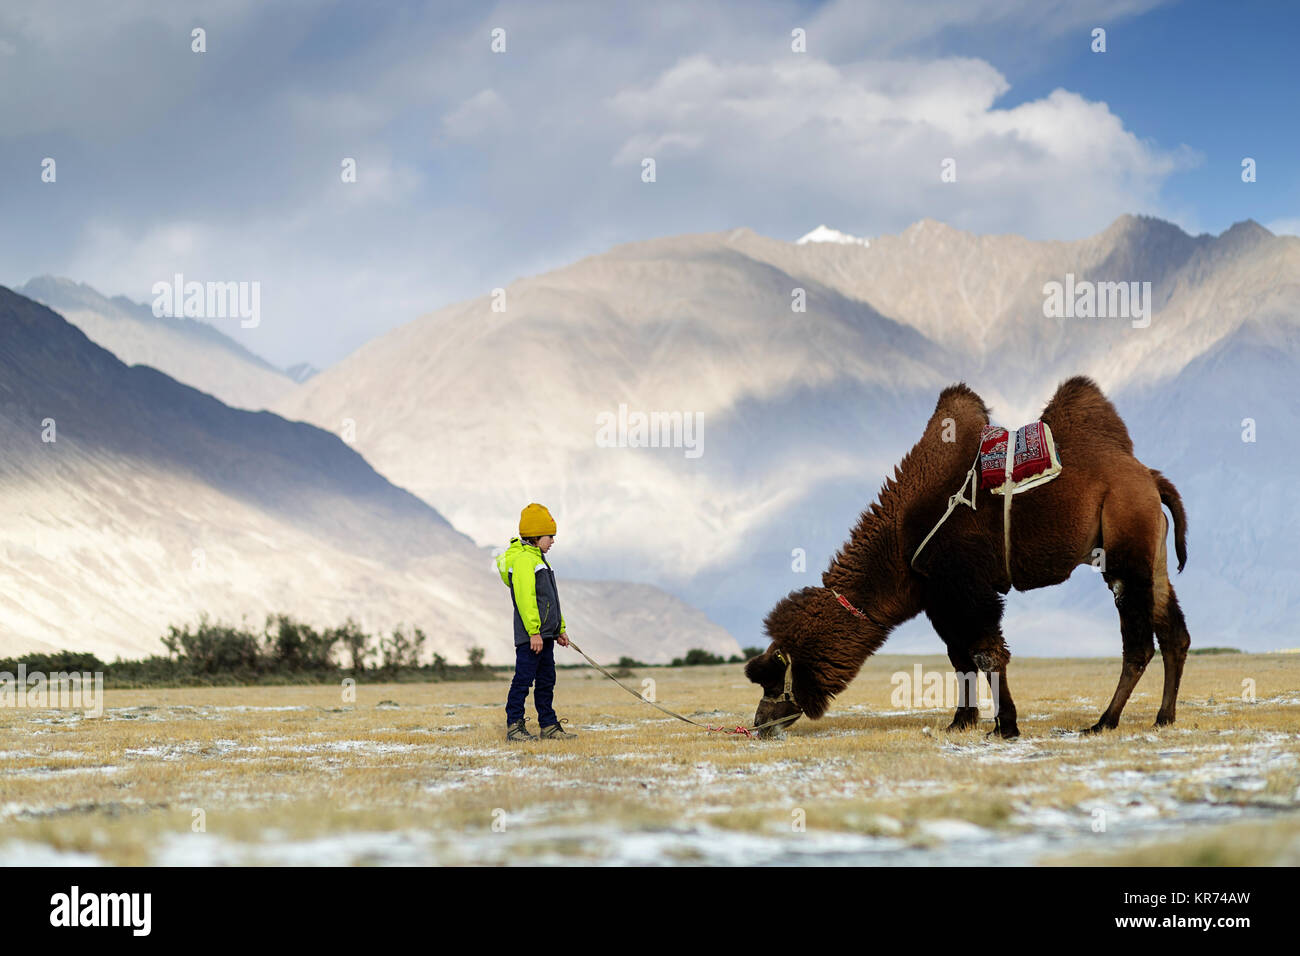 Young western boy riding double hump camel and crossing the desert in the Nubra valley, Ladakh, Jammu and Kashmir, India Stock Photo